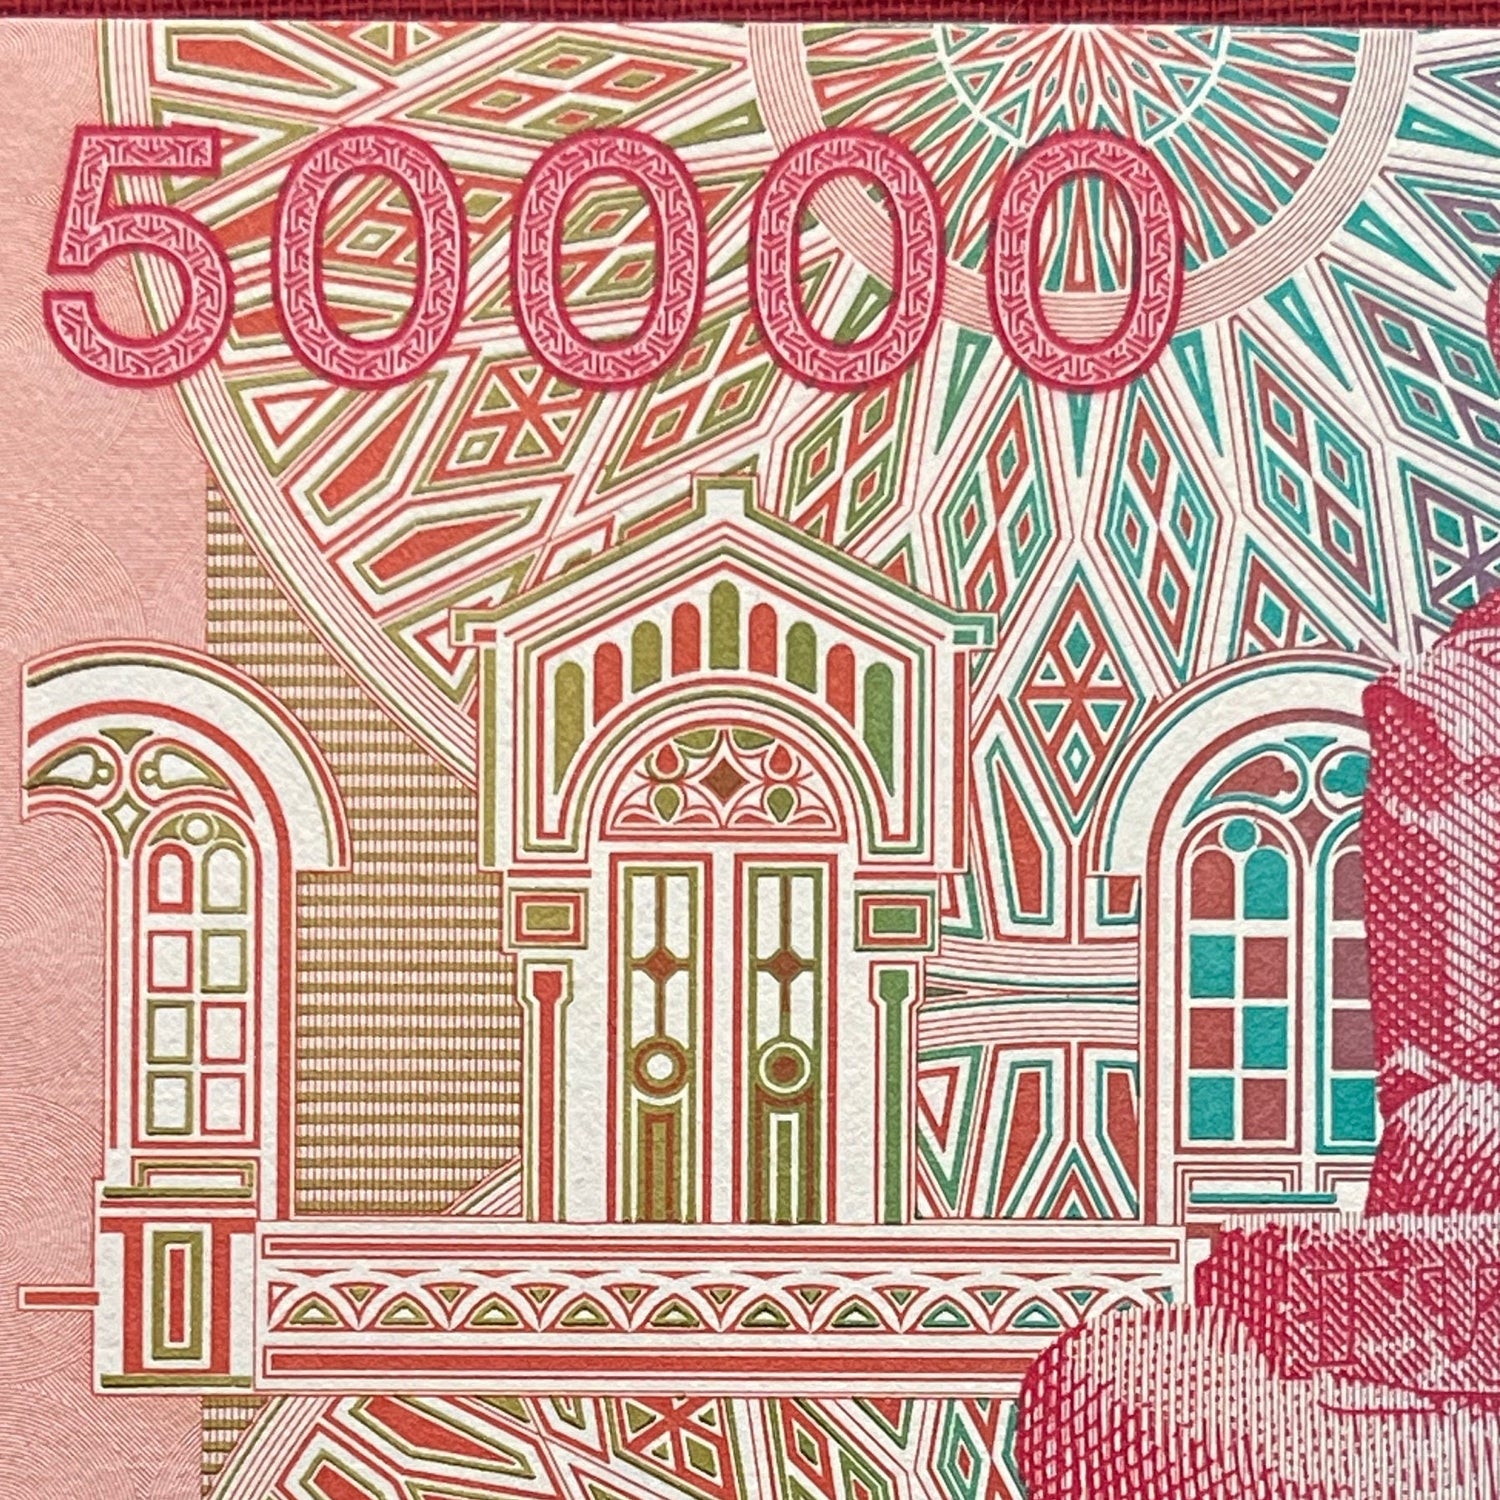 Scientist Priest Roger Boscovich & Mother Croatia 50,000 Dinara Croatia Authentic Banknote Money for Jewelry and Collage (Baptismal Font)